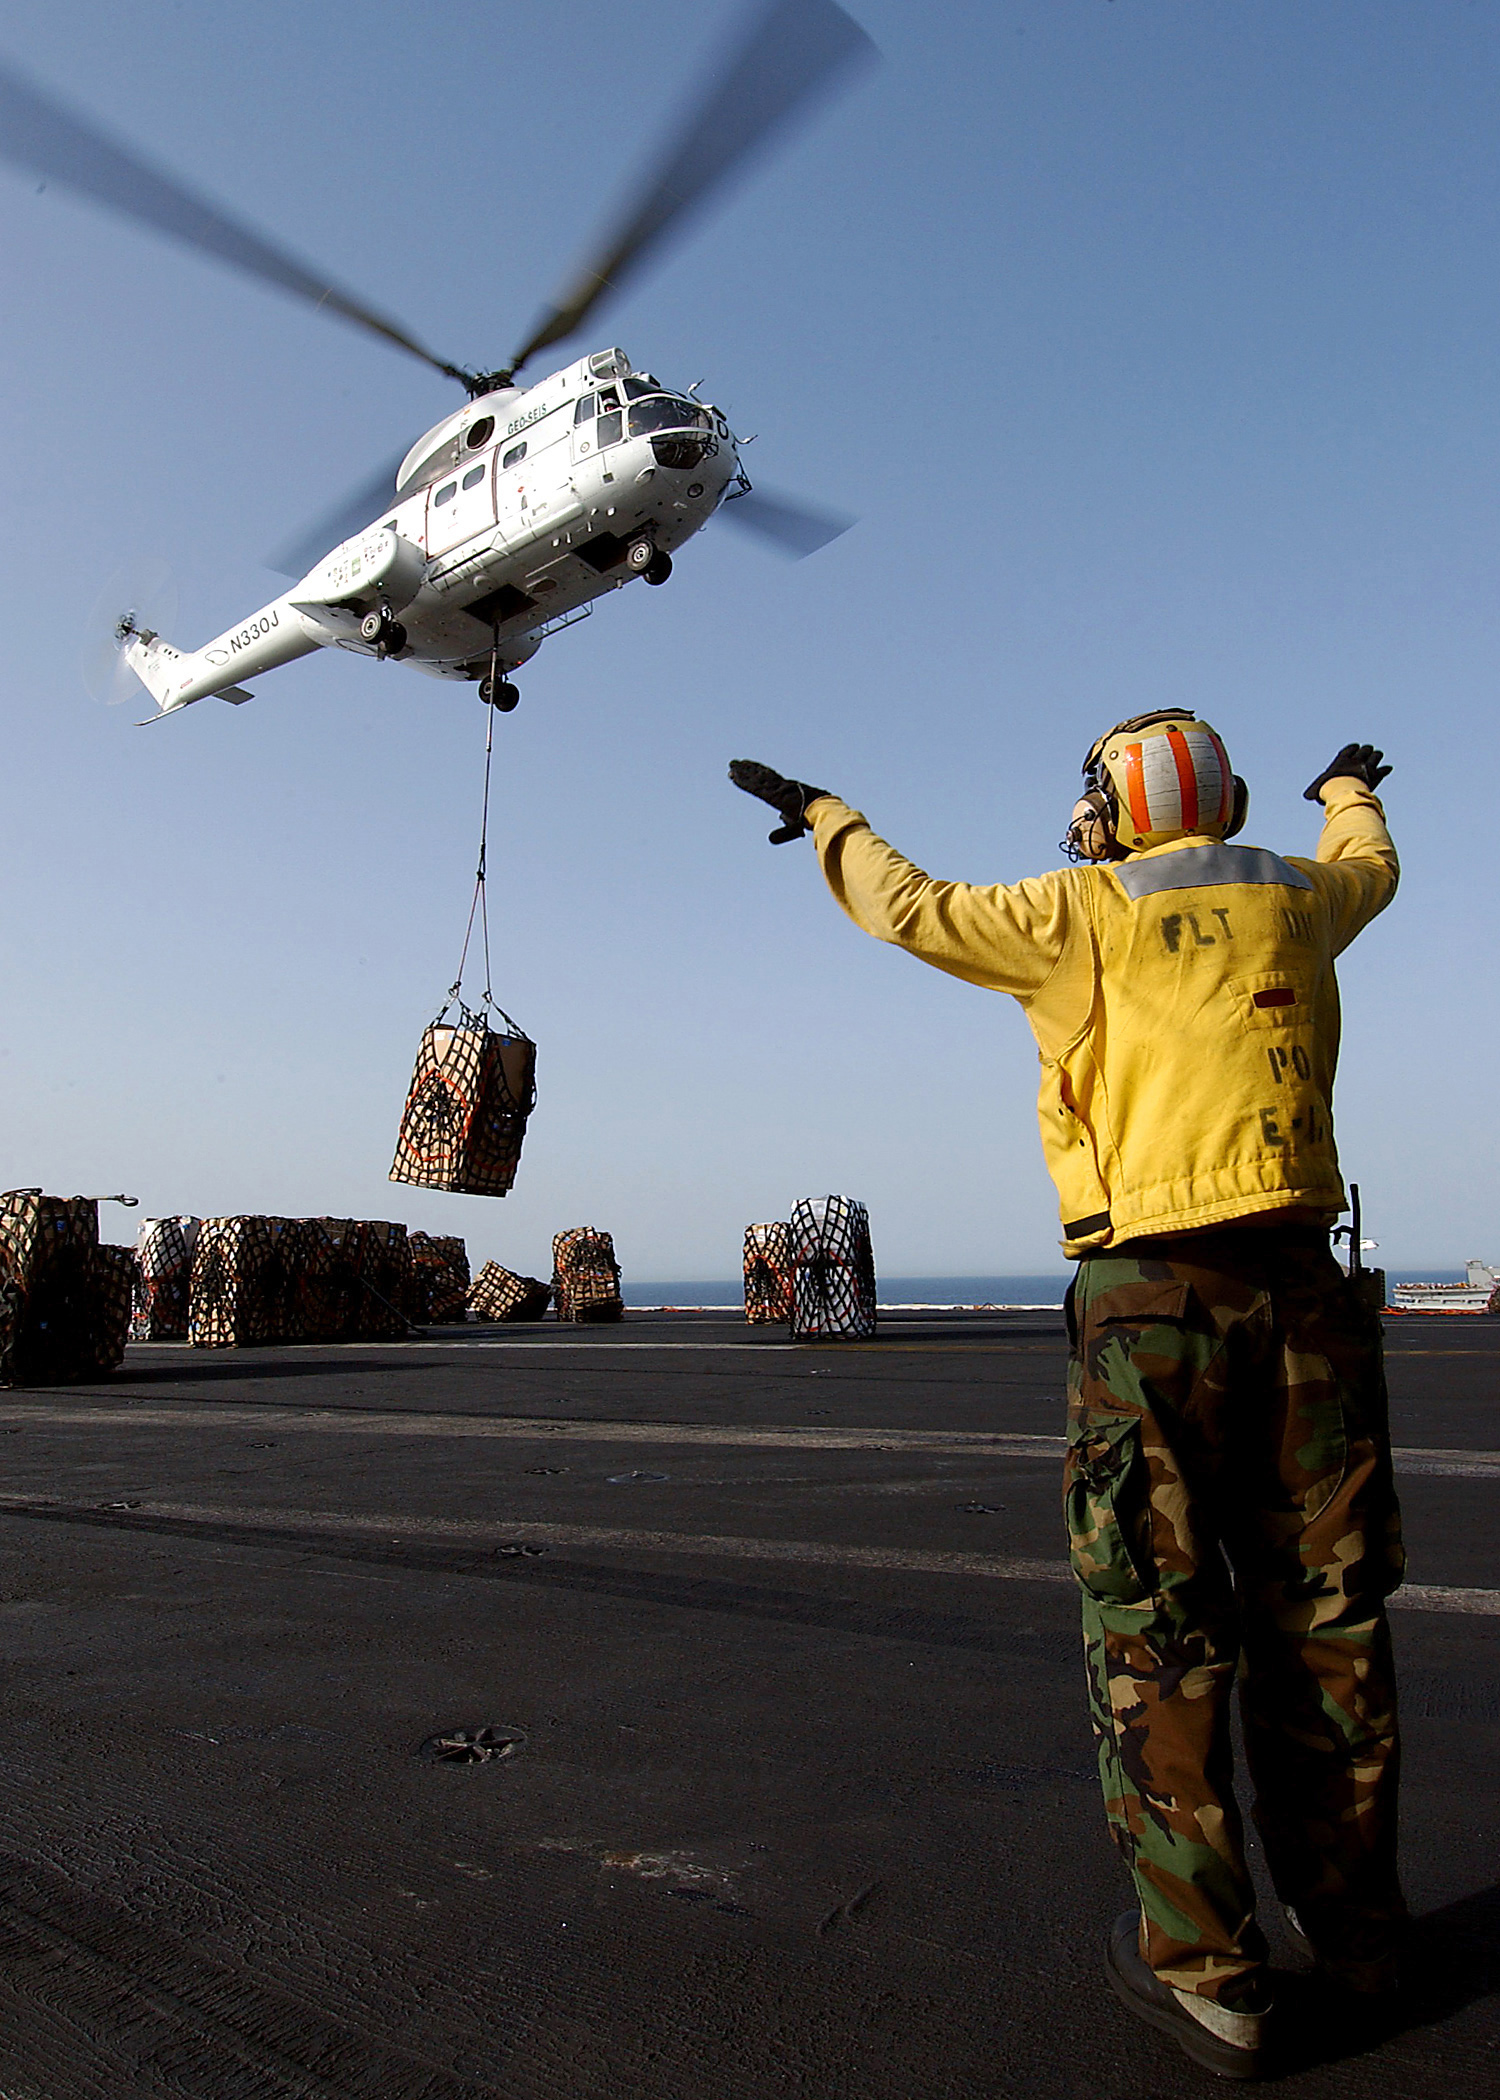 US Navy 040527-N-7871M-047 Aviation Boatswain's Mate 2nd Class Francis Gardner, of Waukegan, Ill., directs an Aerospatiale SA330 Puma helicopter after picking up a pallet of supplies